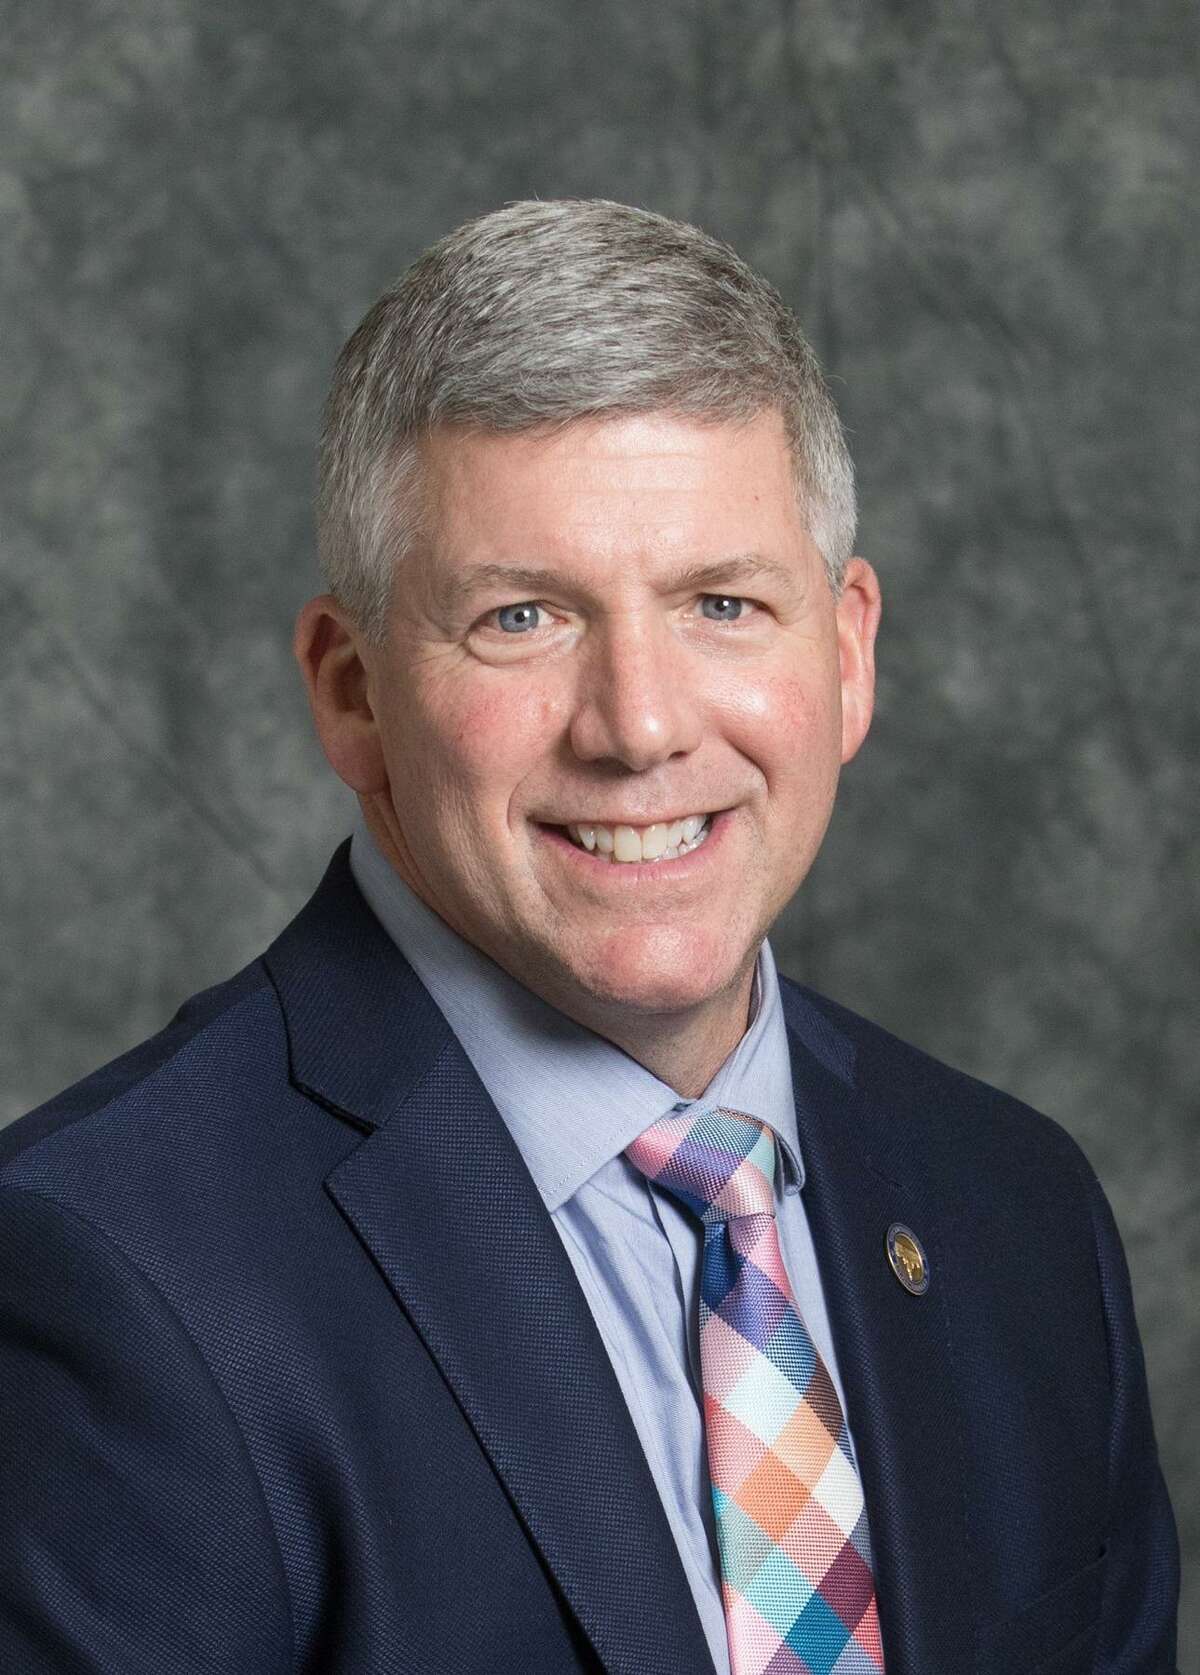 Republican Patrick Callahan is running for a second term as state representative of the 108th House District.